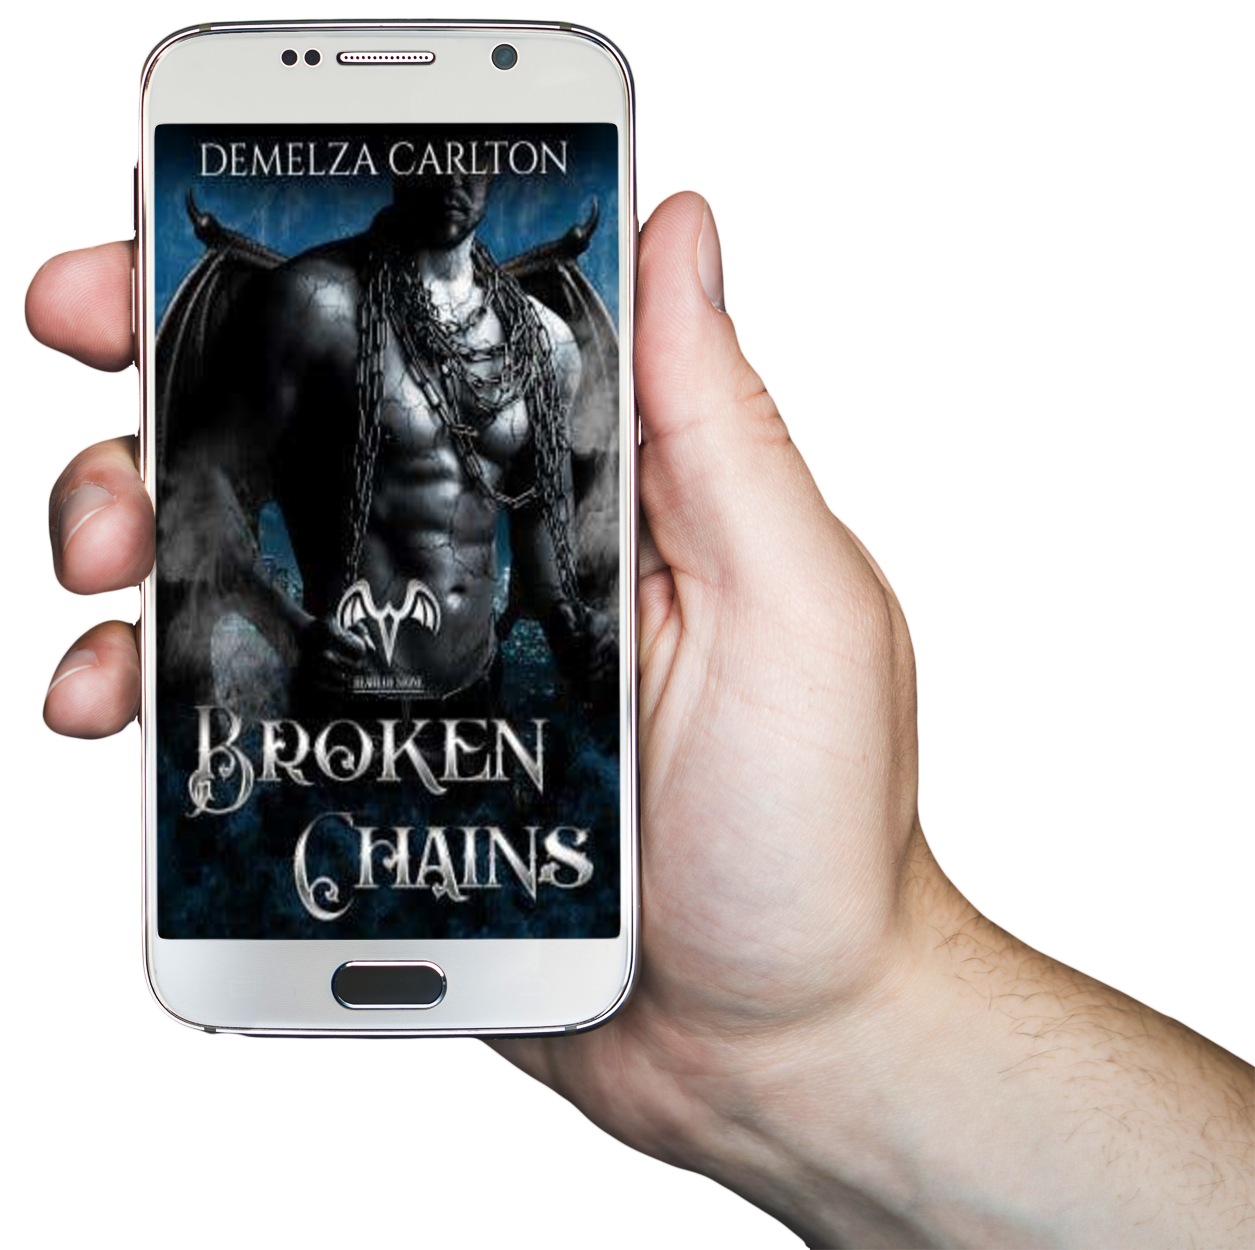 Broken Chains: A Paranormal Protector Tale Book 1 in the Heart of Stone series by USA Today Bestselling Author Demelza Carlton ebook